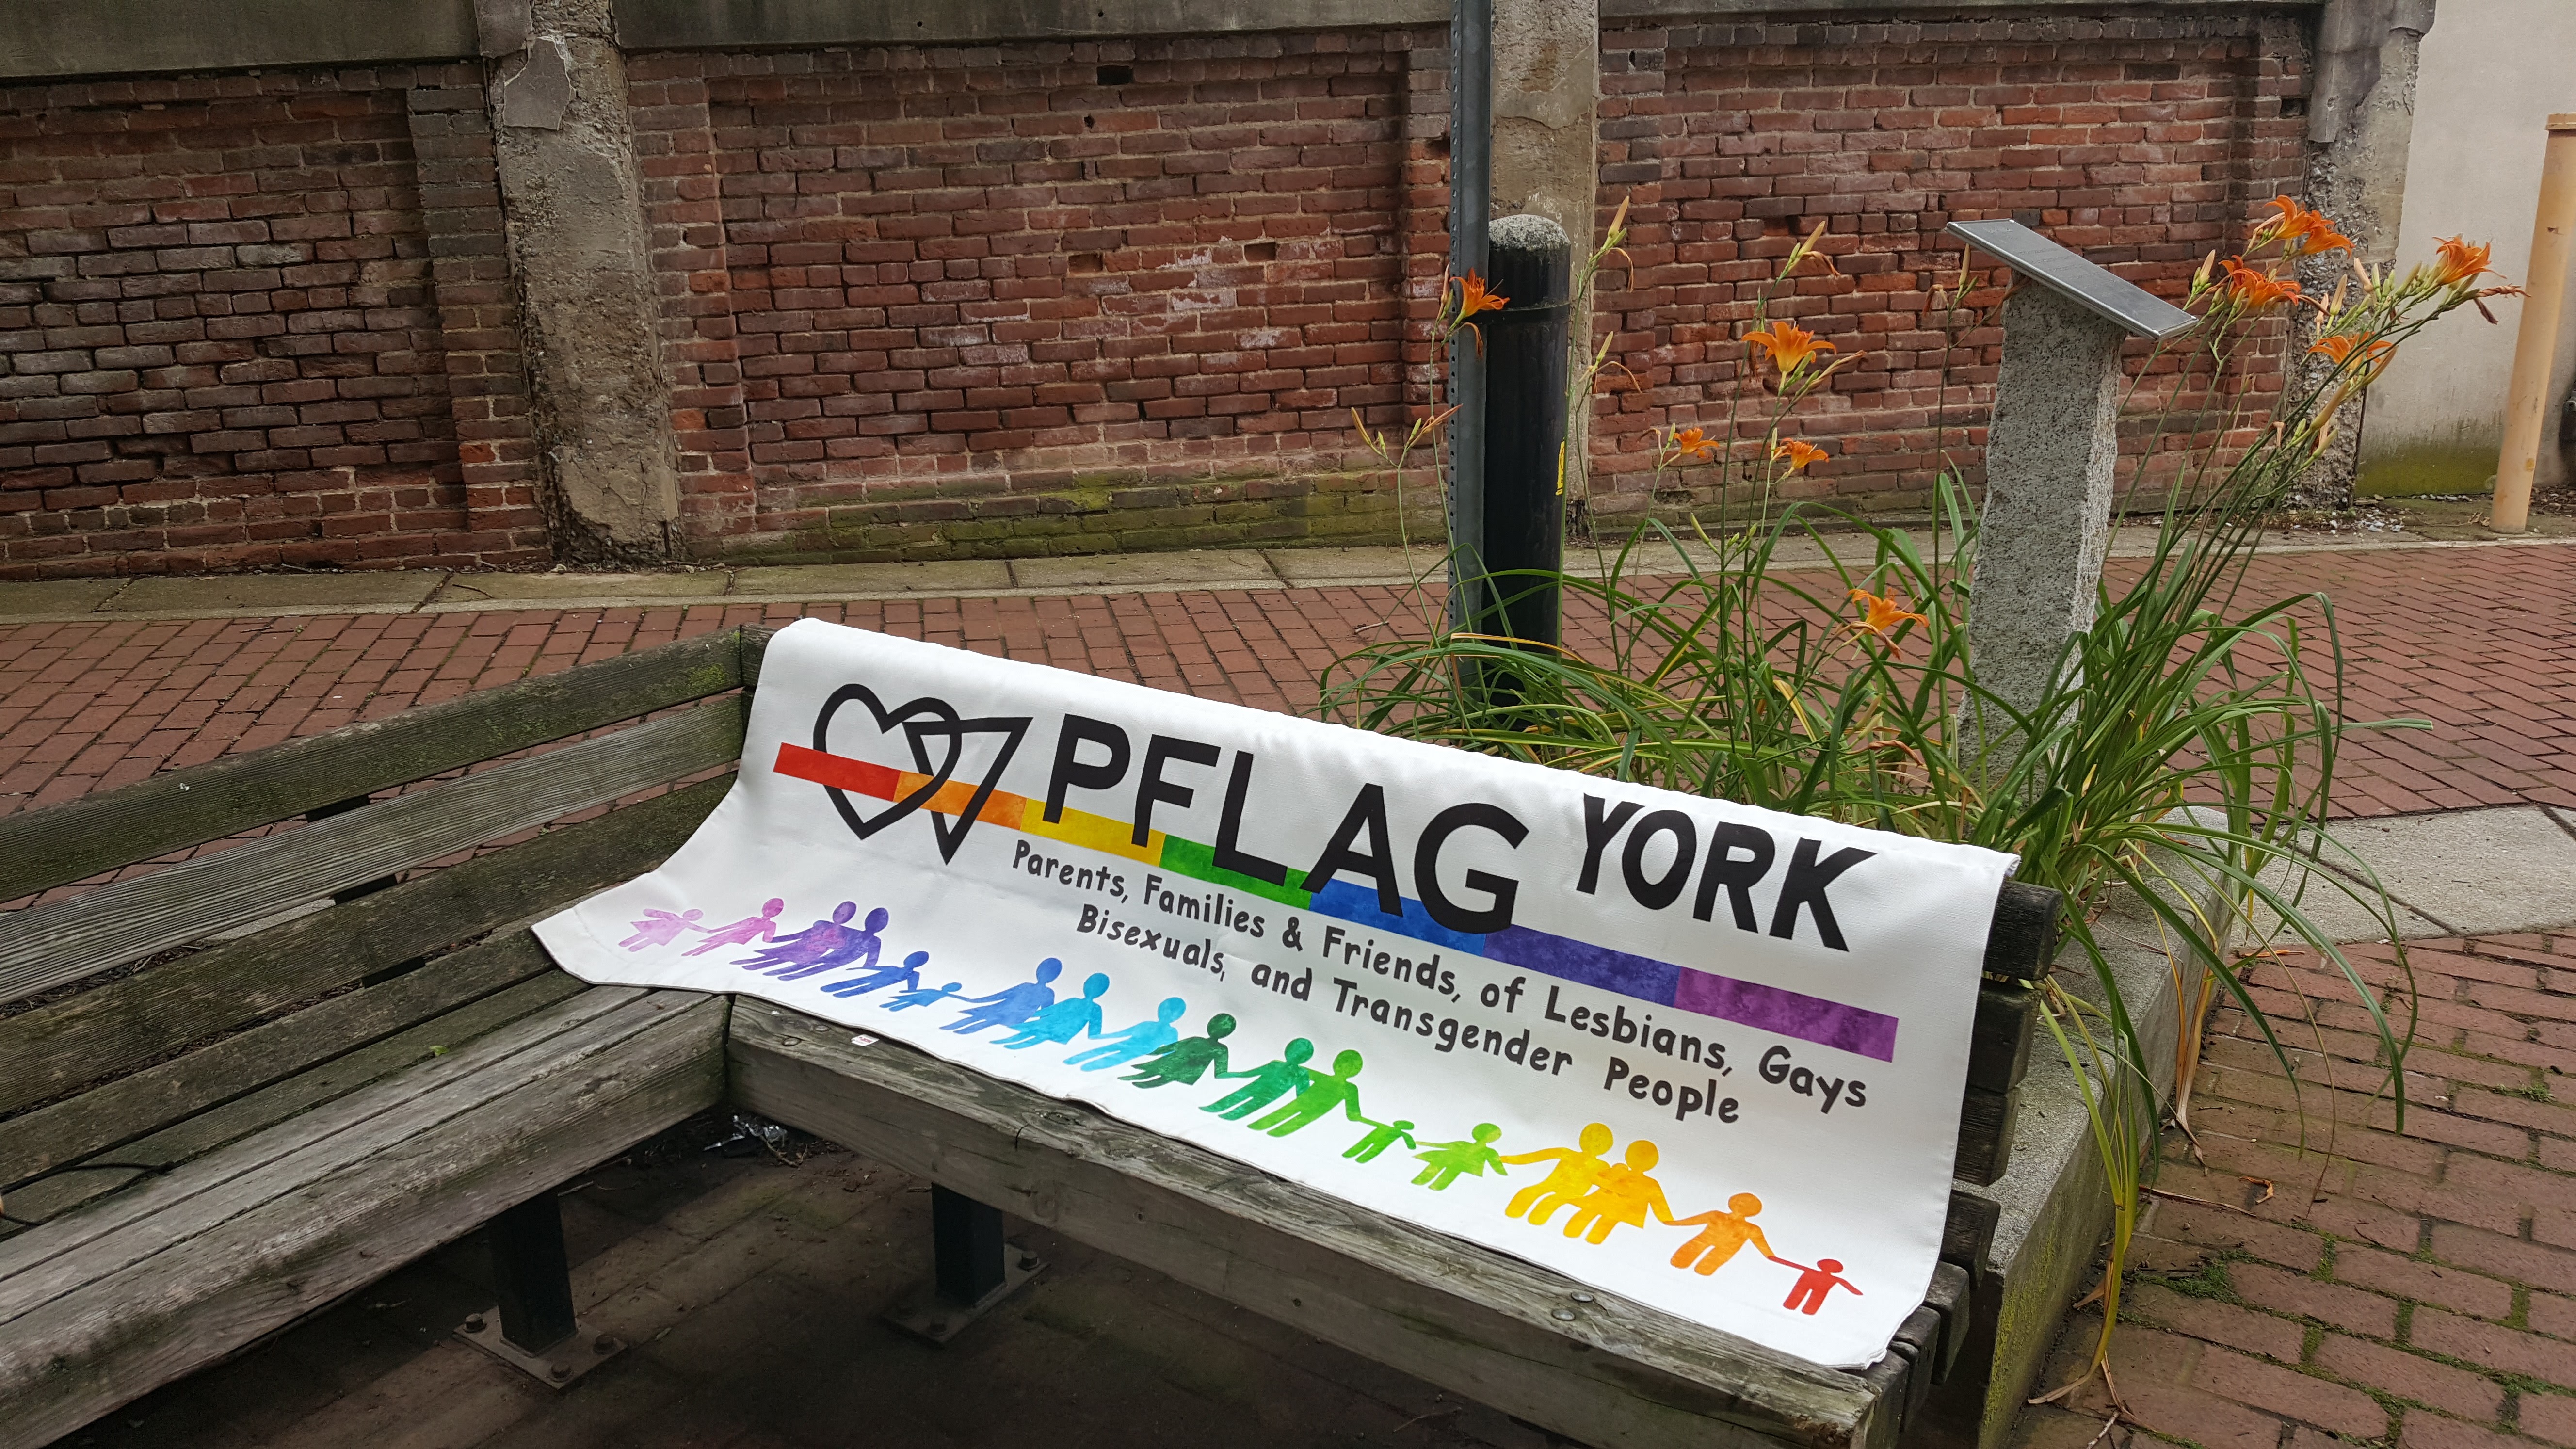 The PFLAG York Banner shows how all variety of families are equally welcomed